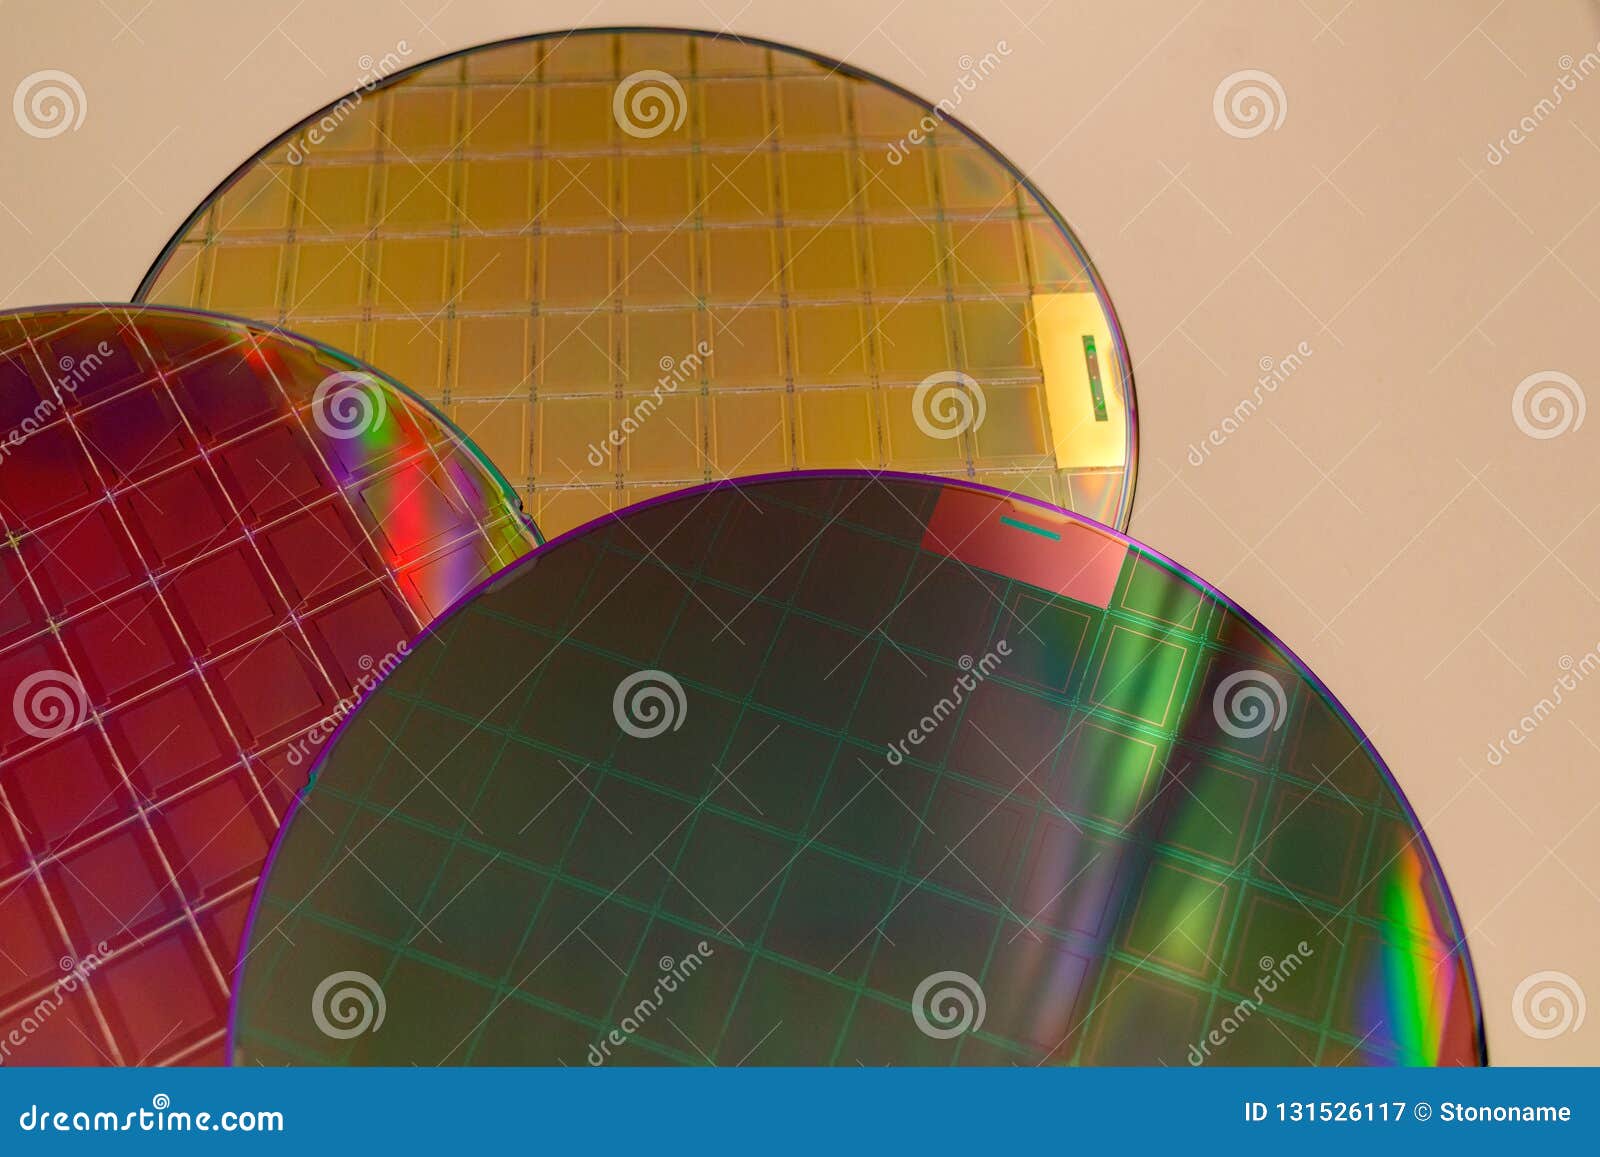 silicon wafers - a wafer is a thin slice of semiconductor material, such as a crystalline silicon, used in electronics for the